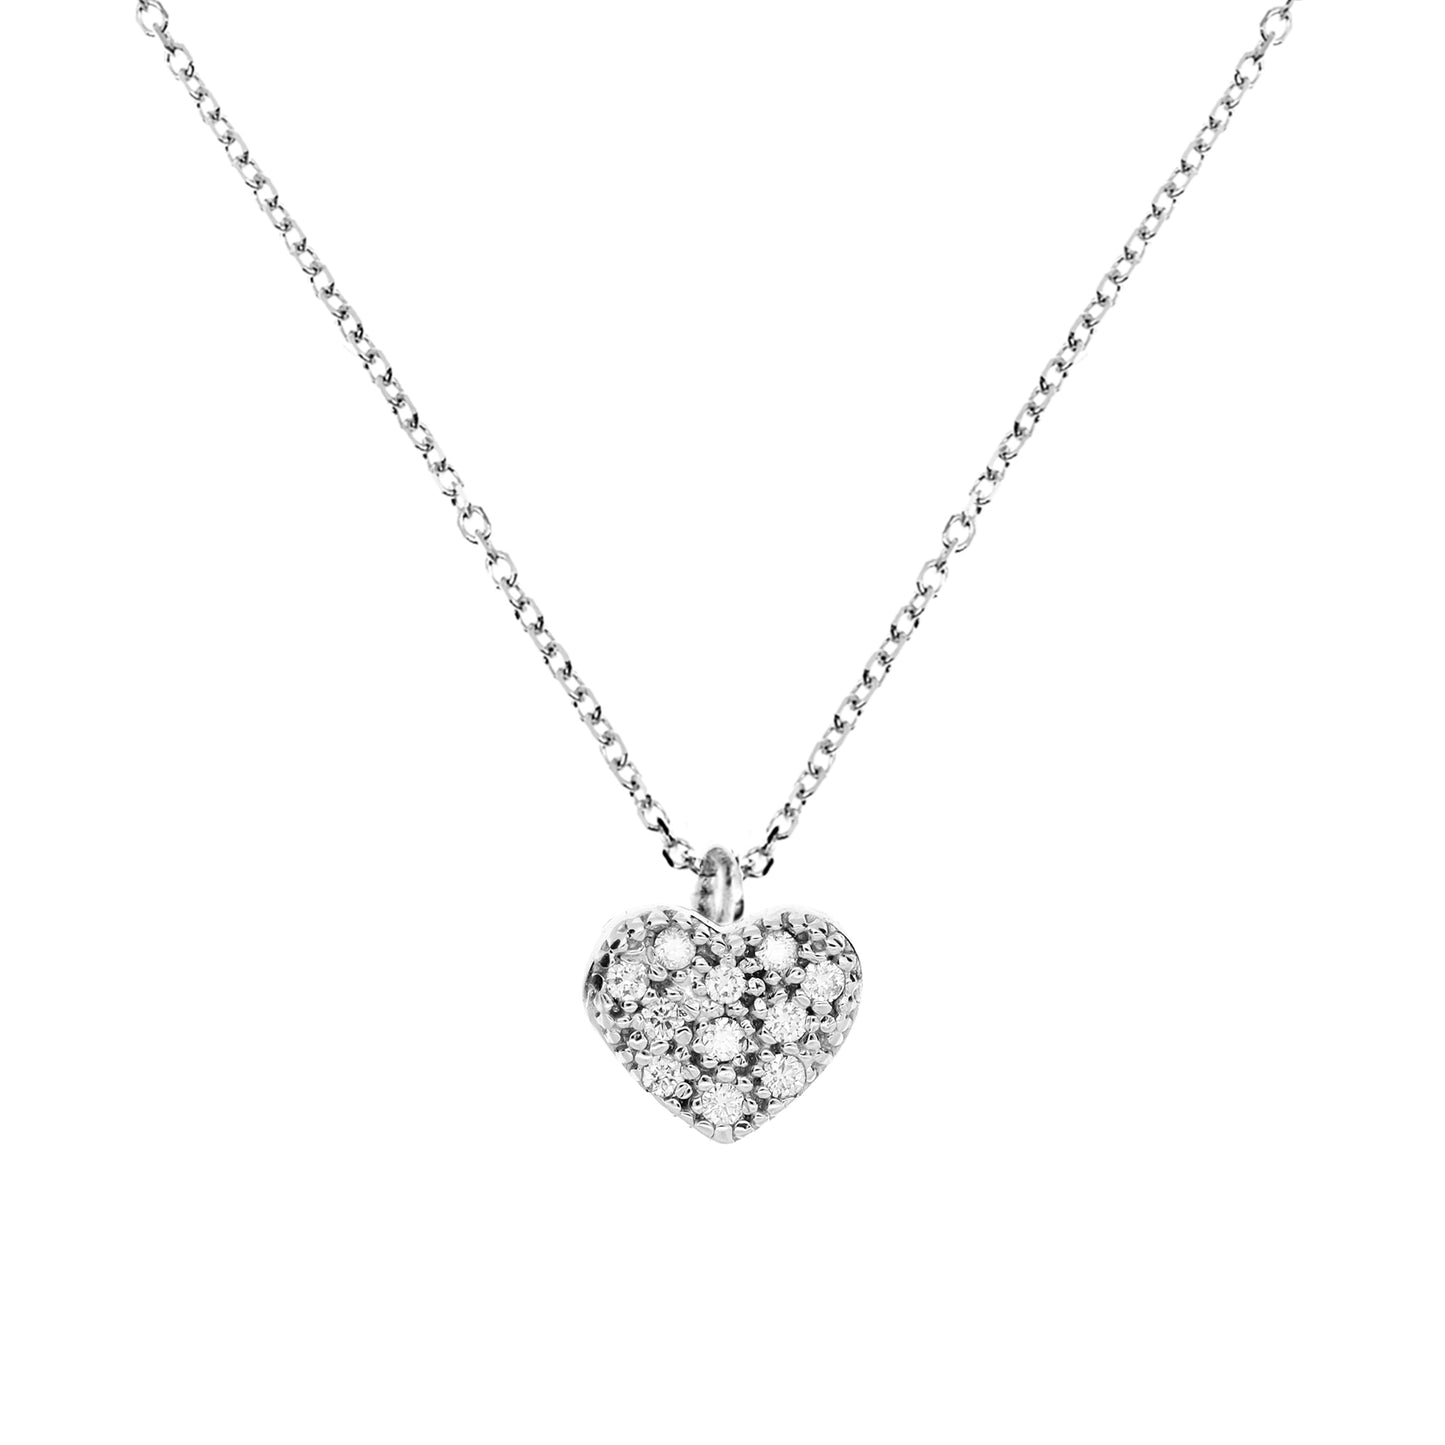 Real Gold Heart Necklace with 100% Natural Diamonds P.Ct 4